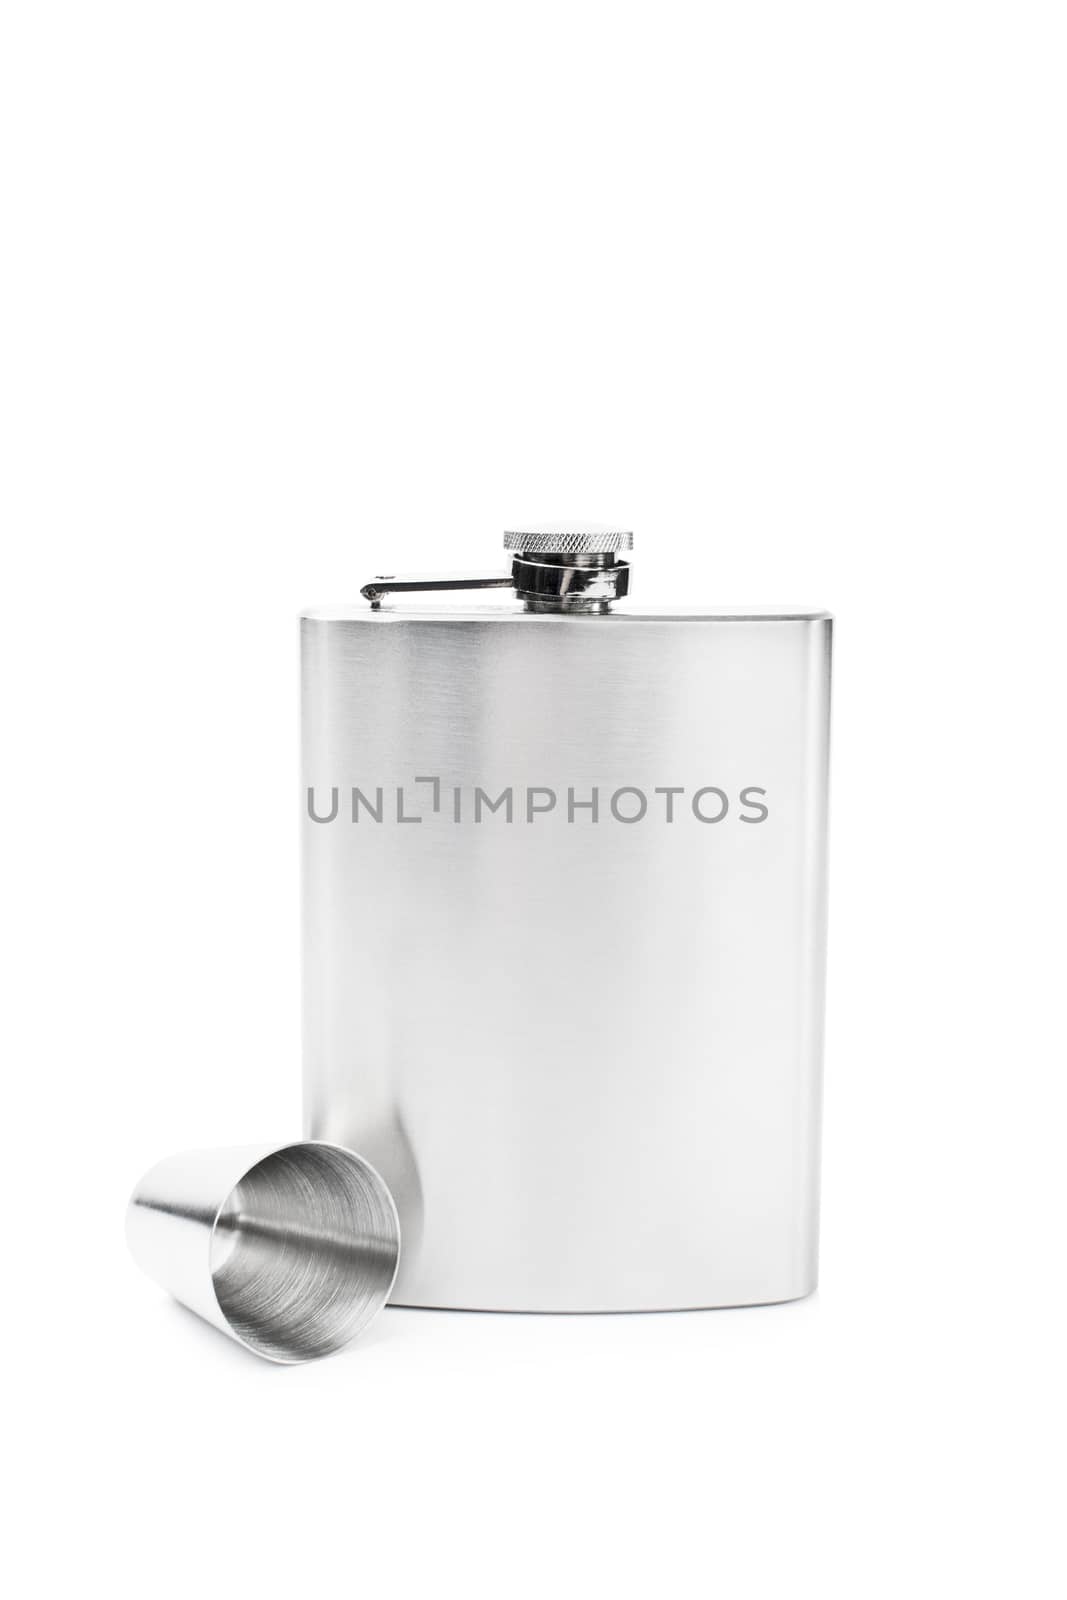 Stainless steel flask with a small metal cup, isolated on white background.